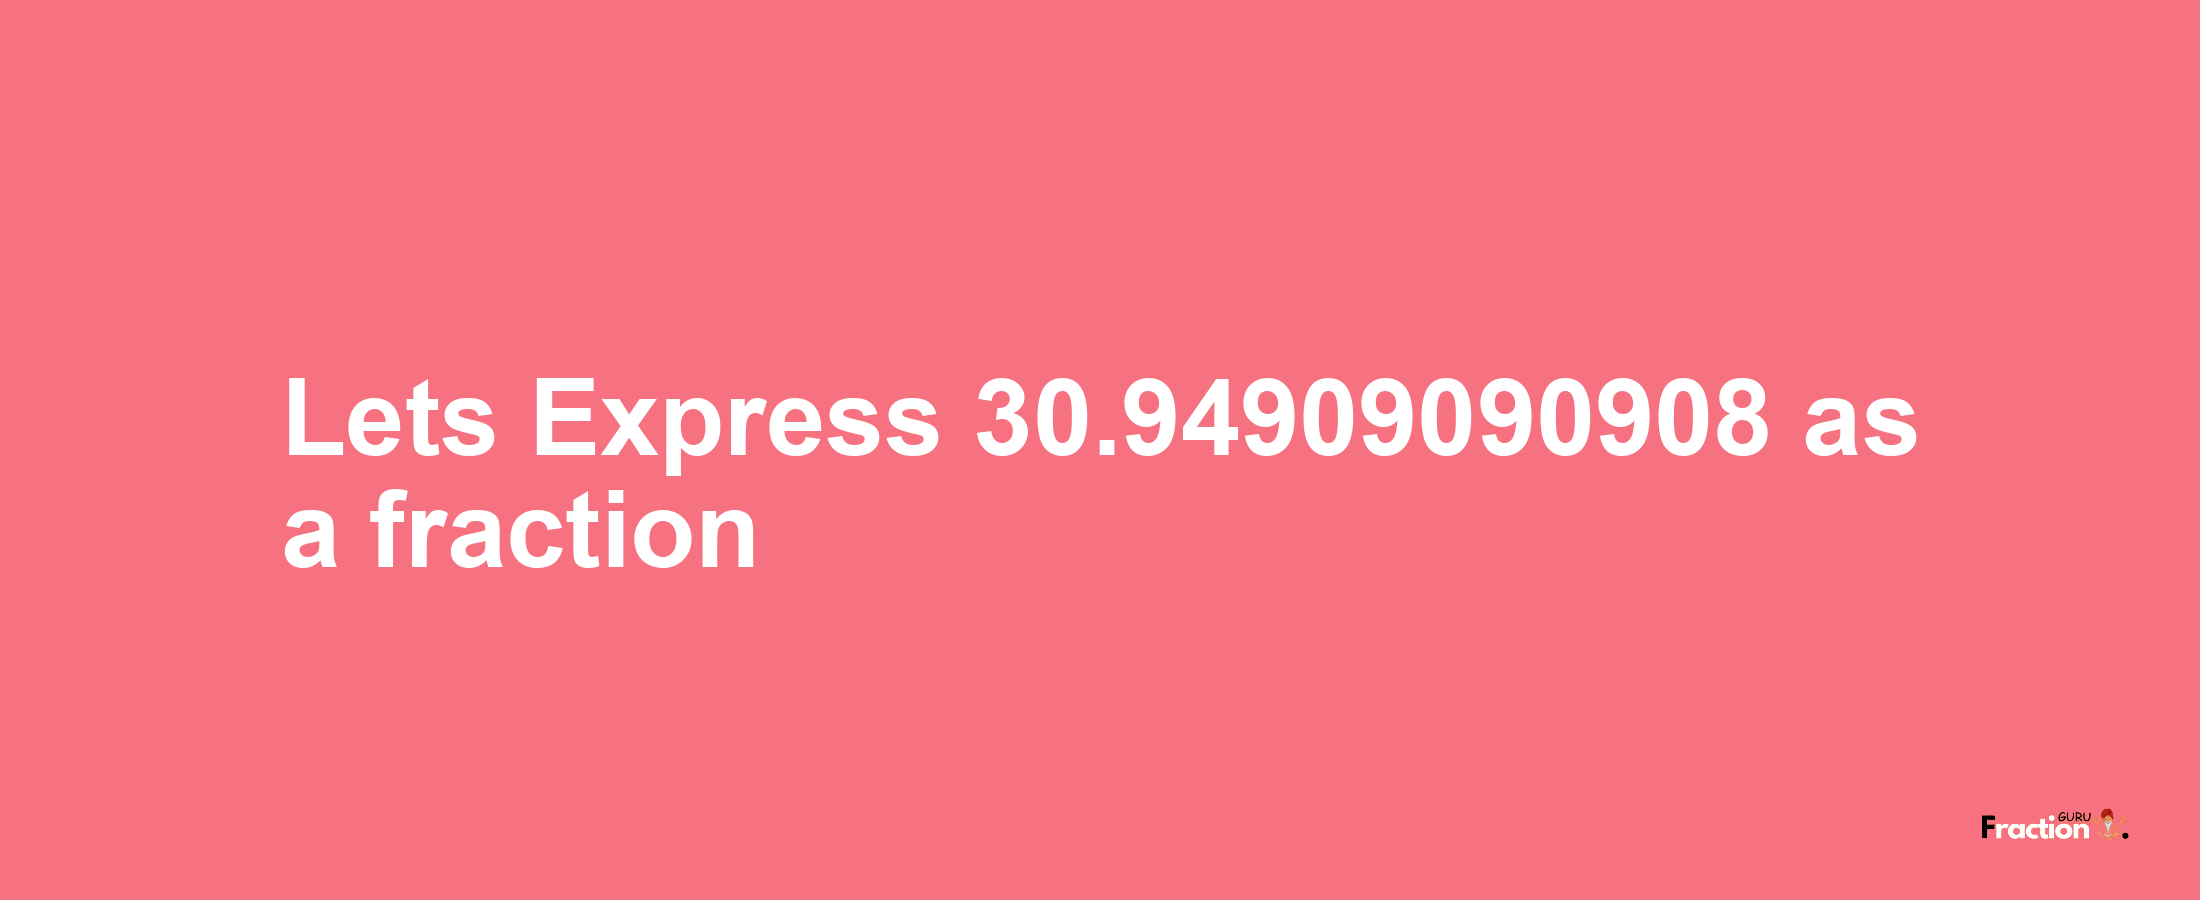 Lets Express 30.94909090908 as afraction